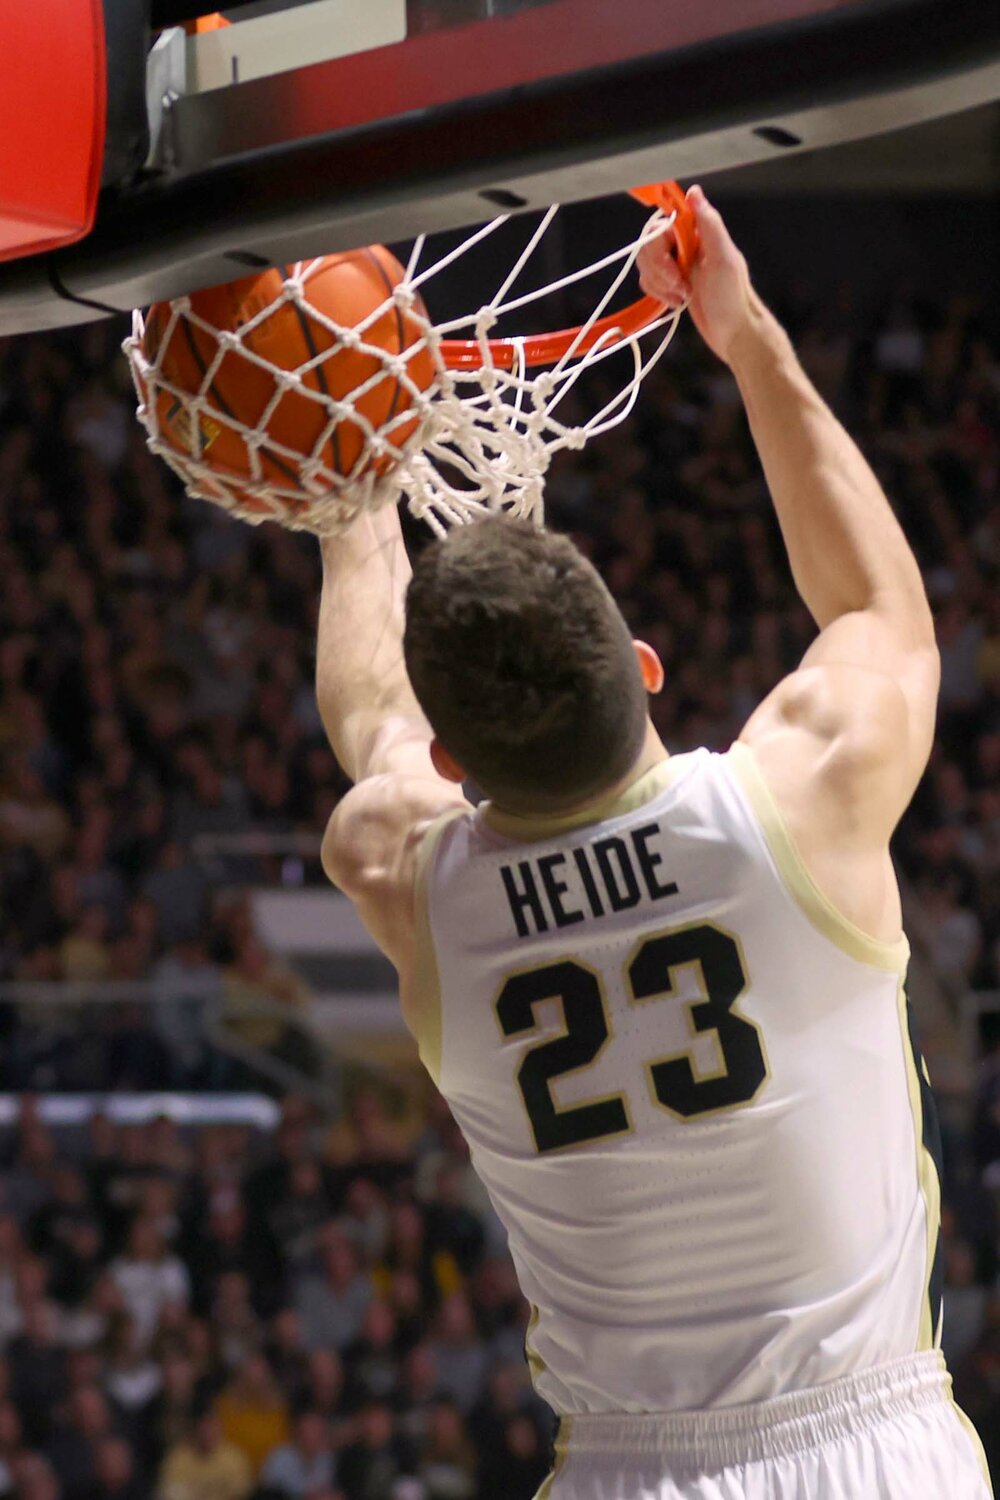 Camden Heide of Purdue - reverse dunk in the game with Eastern Kentucky